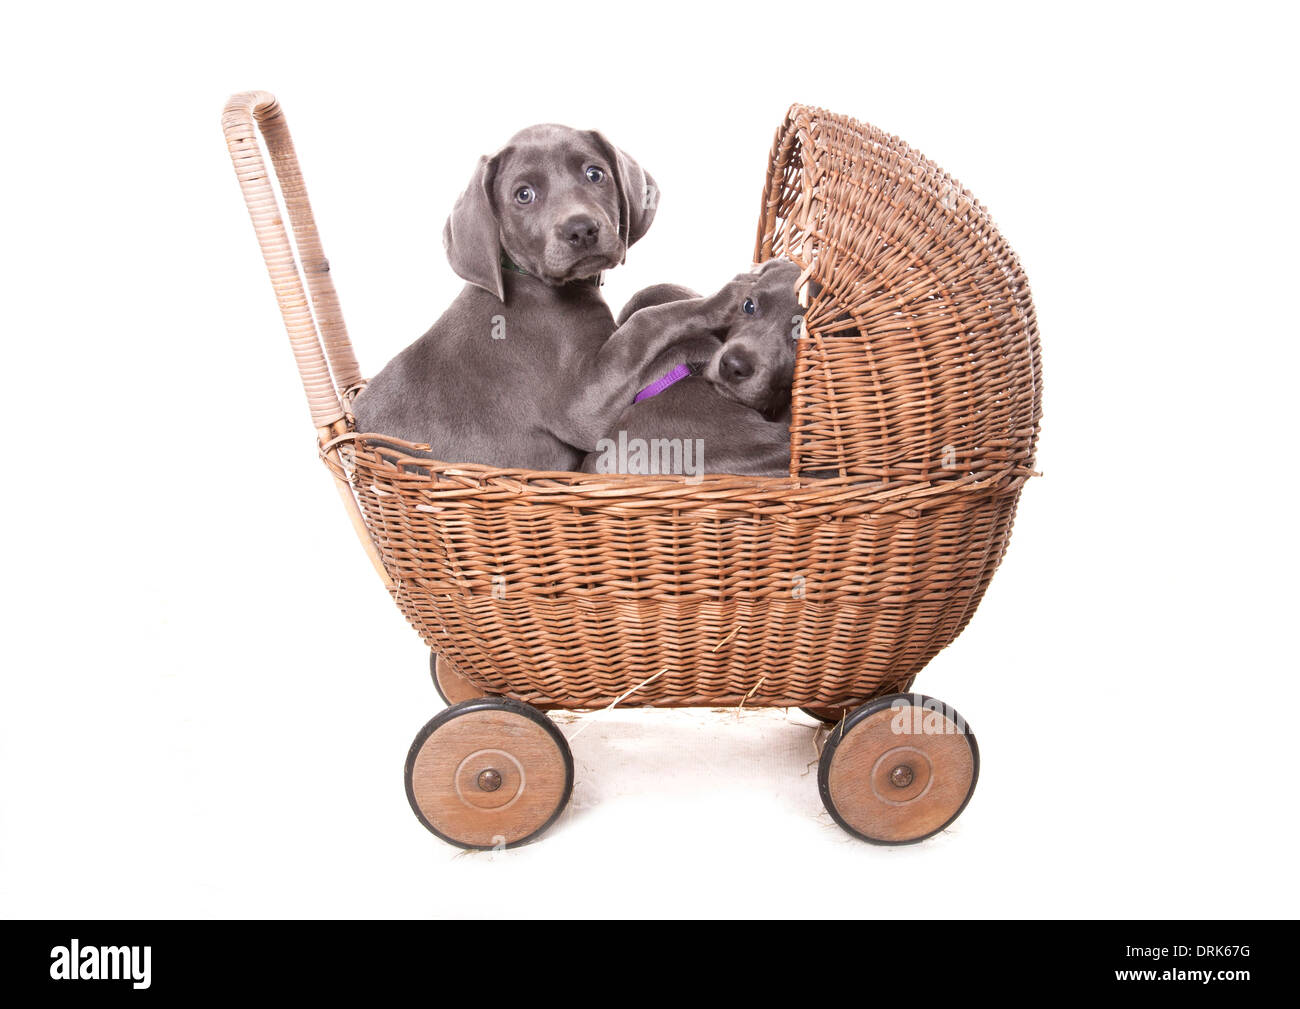 Weimaraner dog. Group of puppies in a pram. Studio picture against a white background Stock Photo